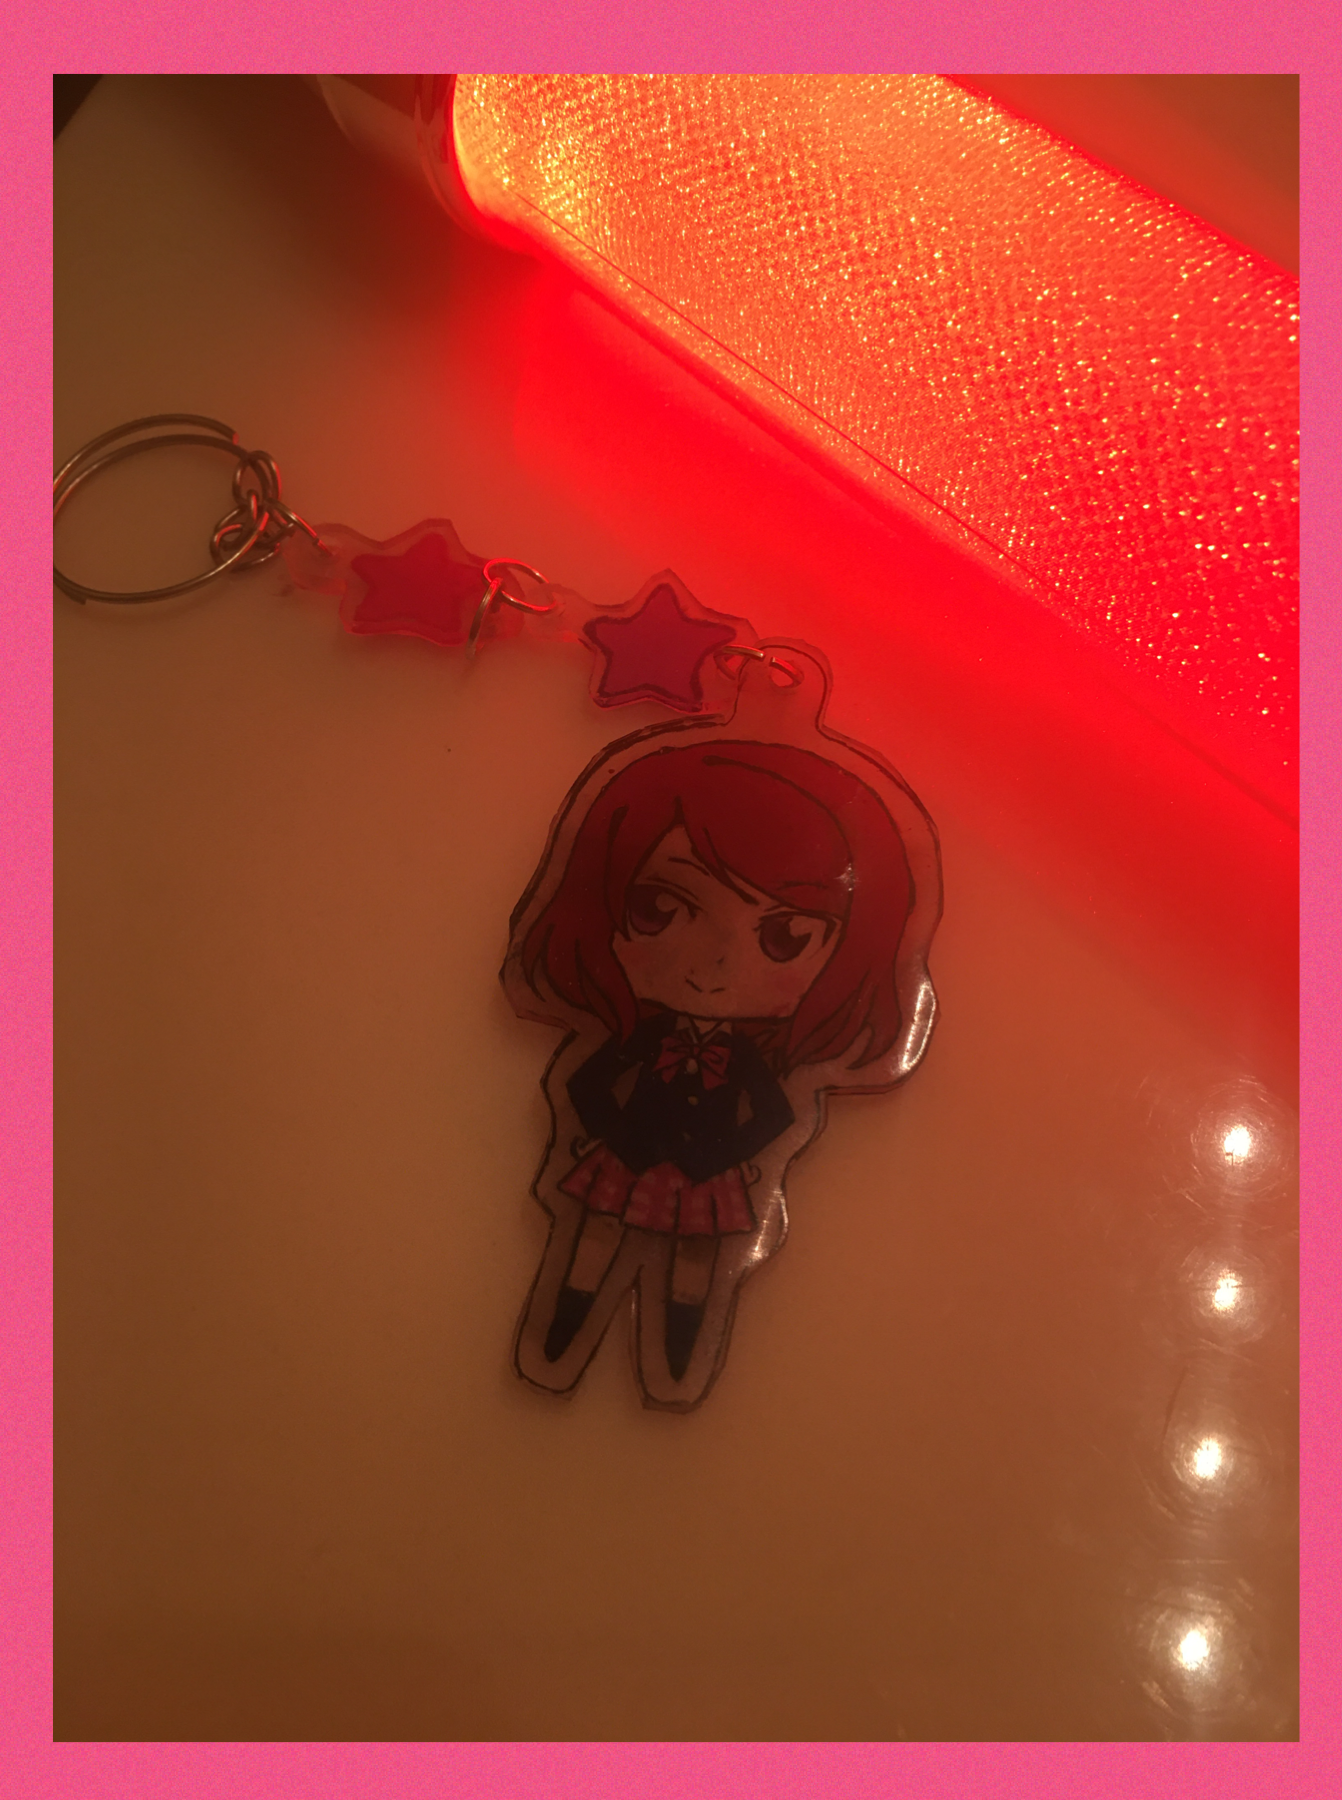 I’m going to a love live concert on Tuesday so I made this keychain for my light stick 